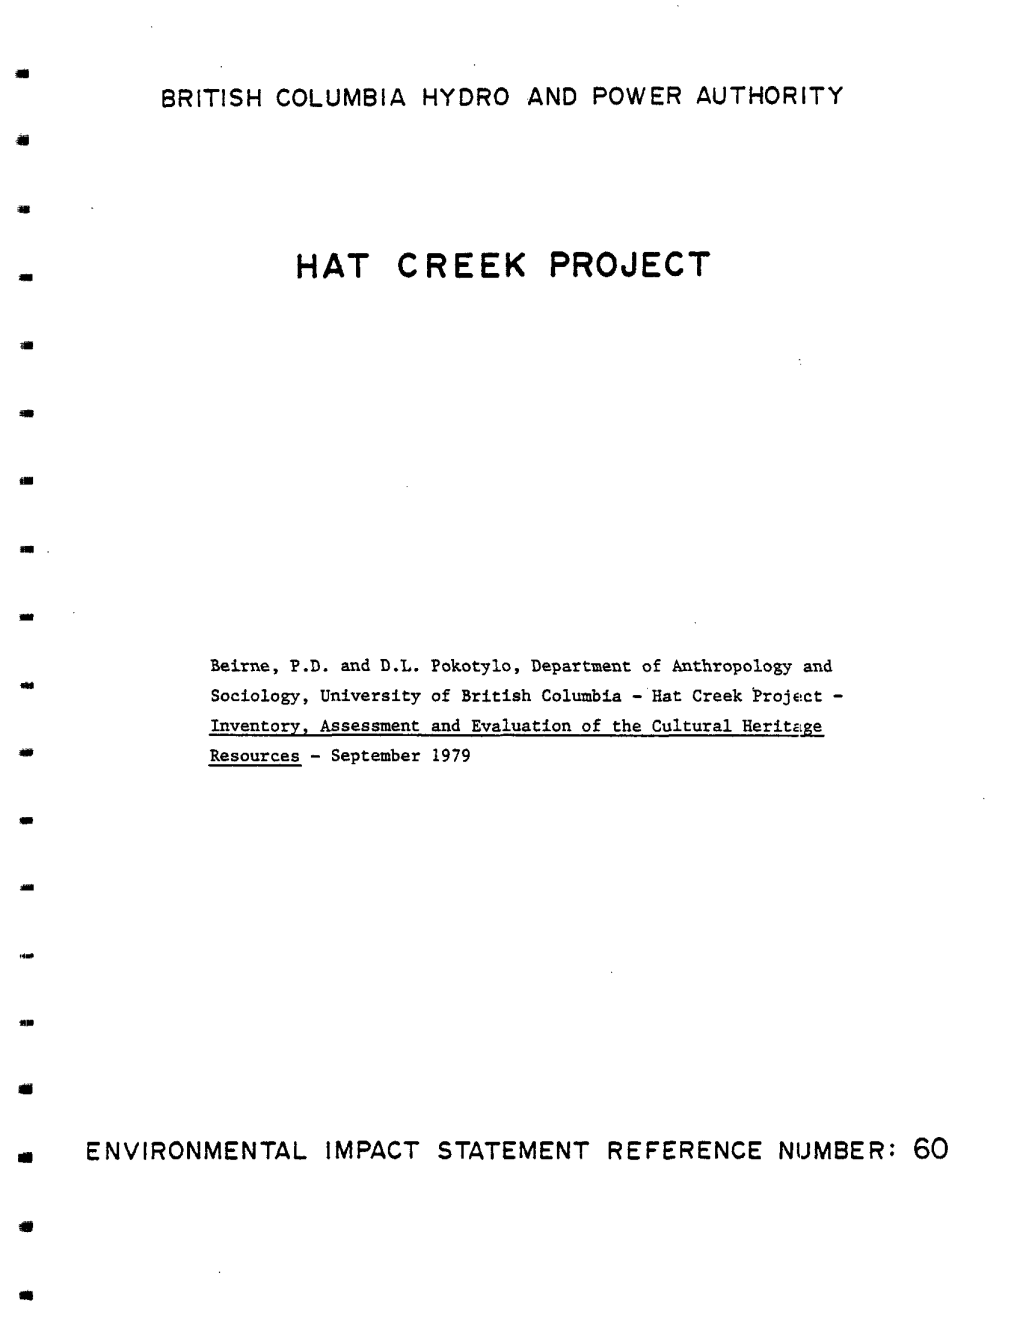 Hat Creek Project- Inventory, Assessment and Evaluation of the Cultural Heritze Resources - September 1979